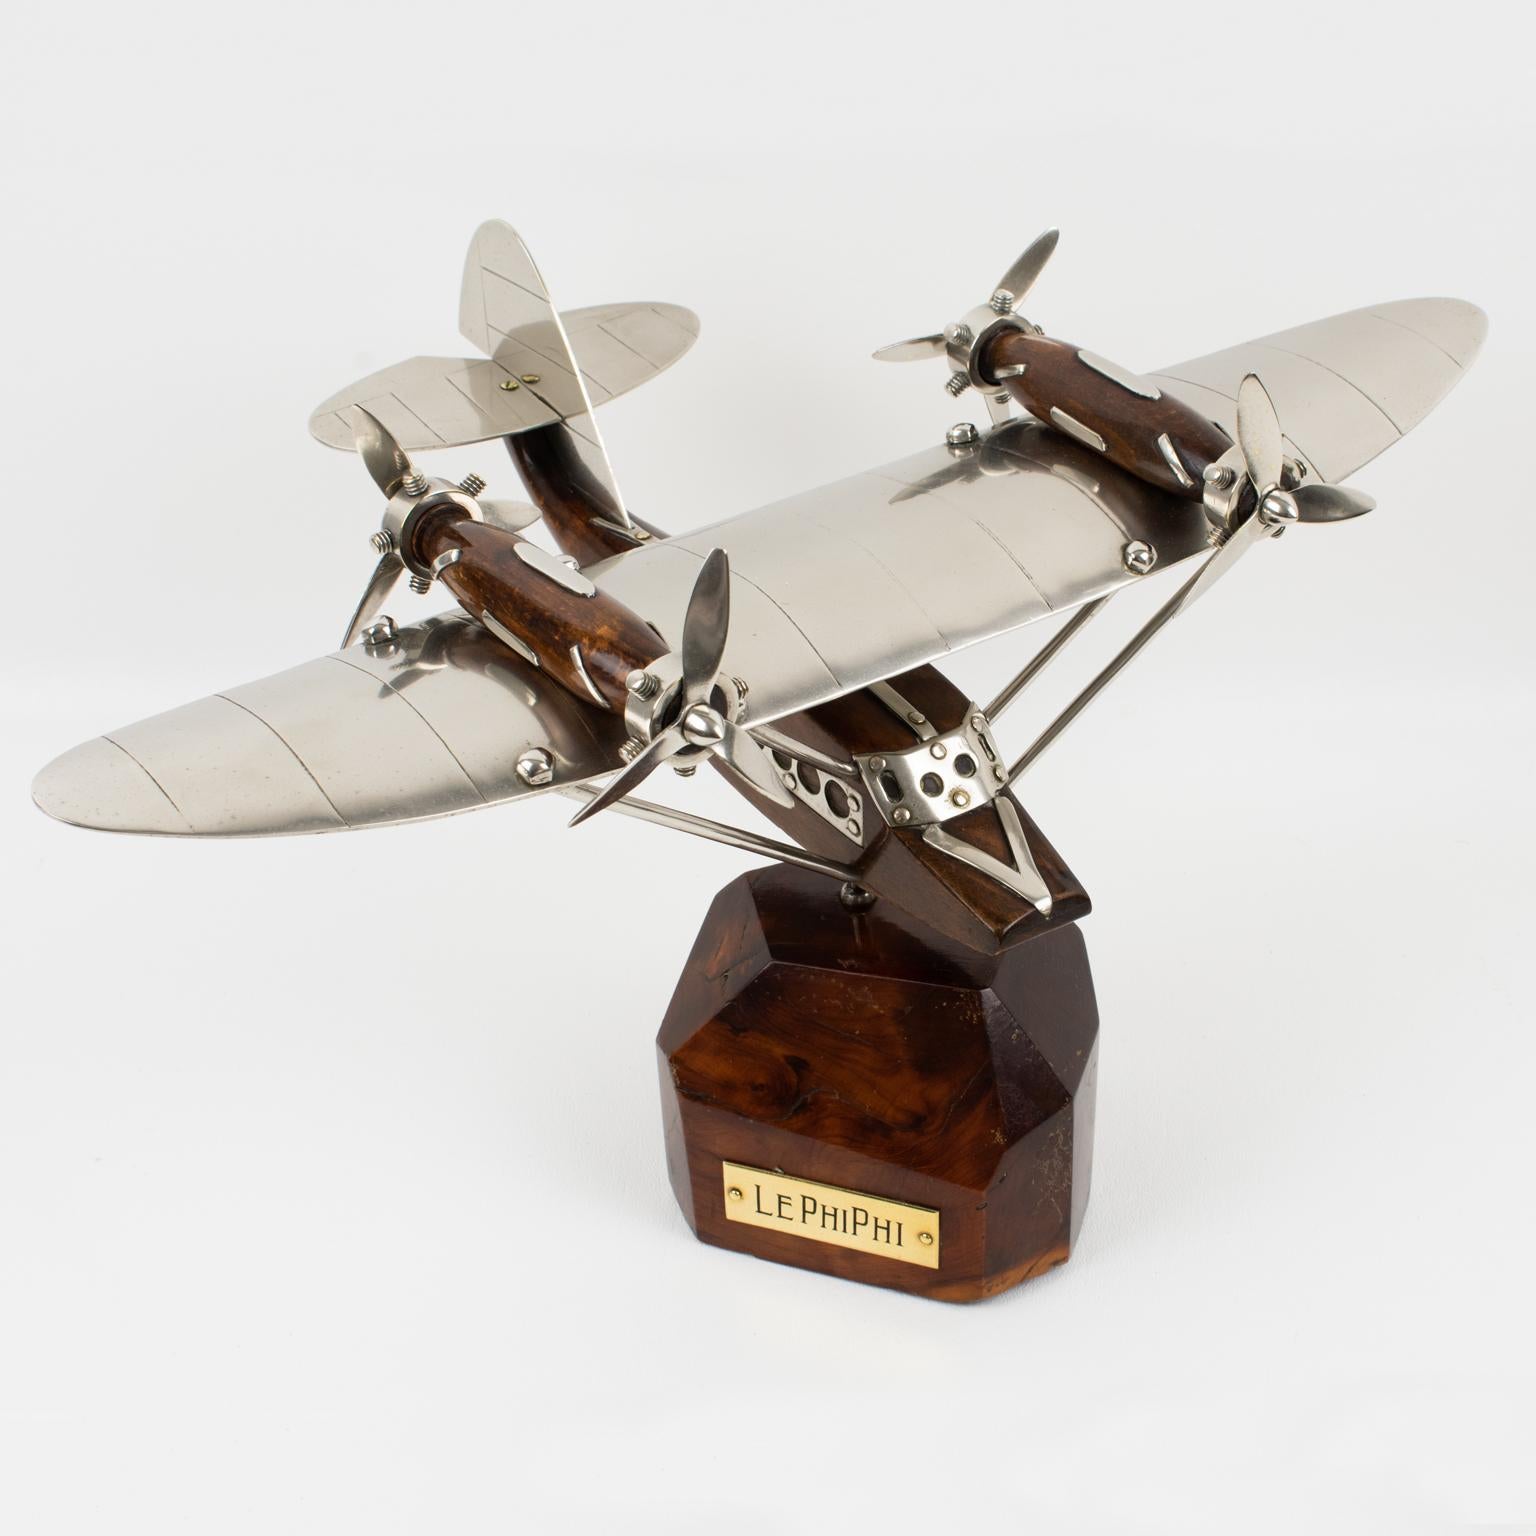 French Art Deco Wood and Chrome Airplane SeaPlane Aviation Model, 1940s For Sale 2